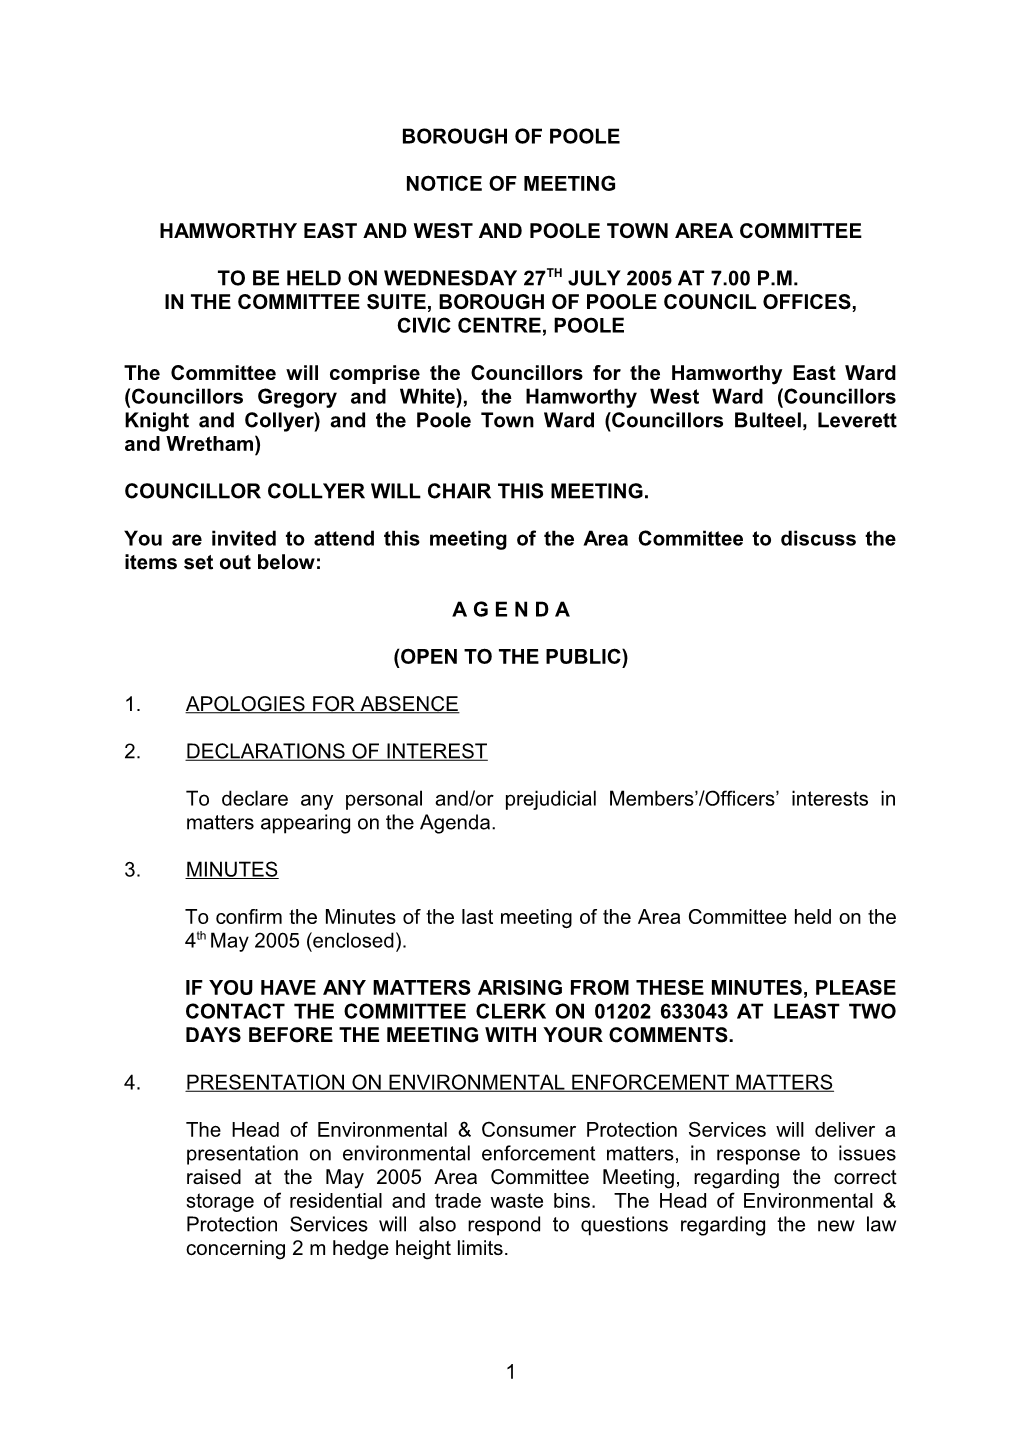 Agenda - Hamworthy East and West and Poole Town Area Committee - 27 July 2005